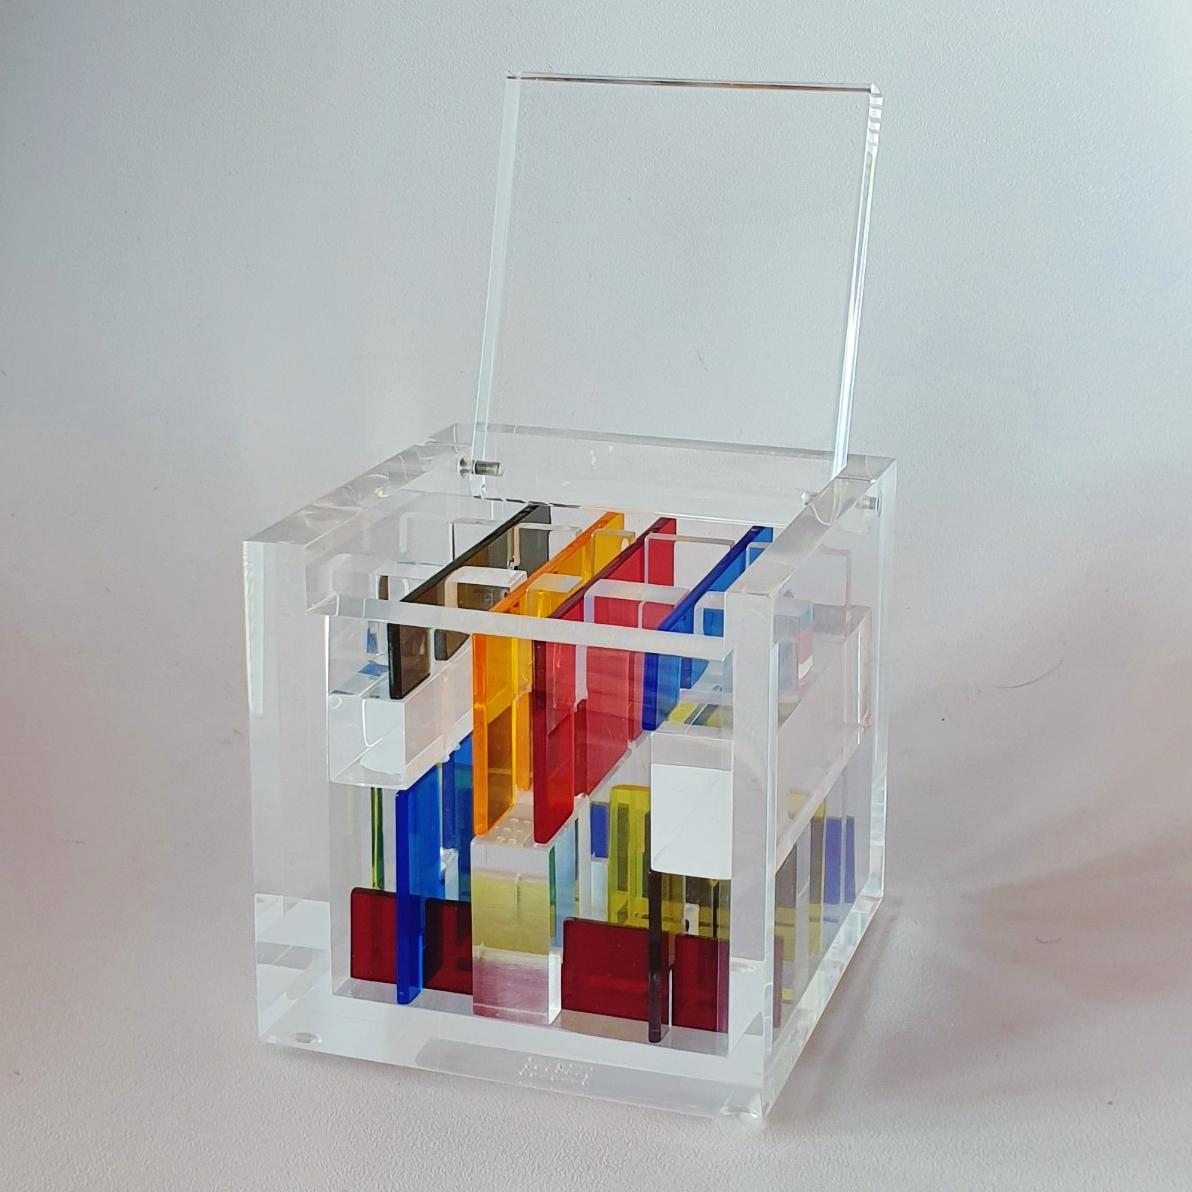 Homage to Mondriaan - contemporary modern abstract geometric cube sculpture - Gray Abstract Sculpture by Haringa + Olijve